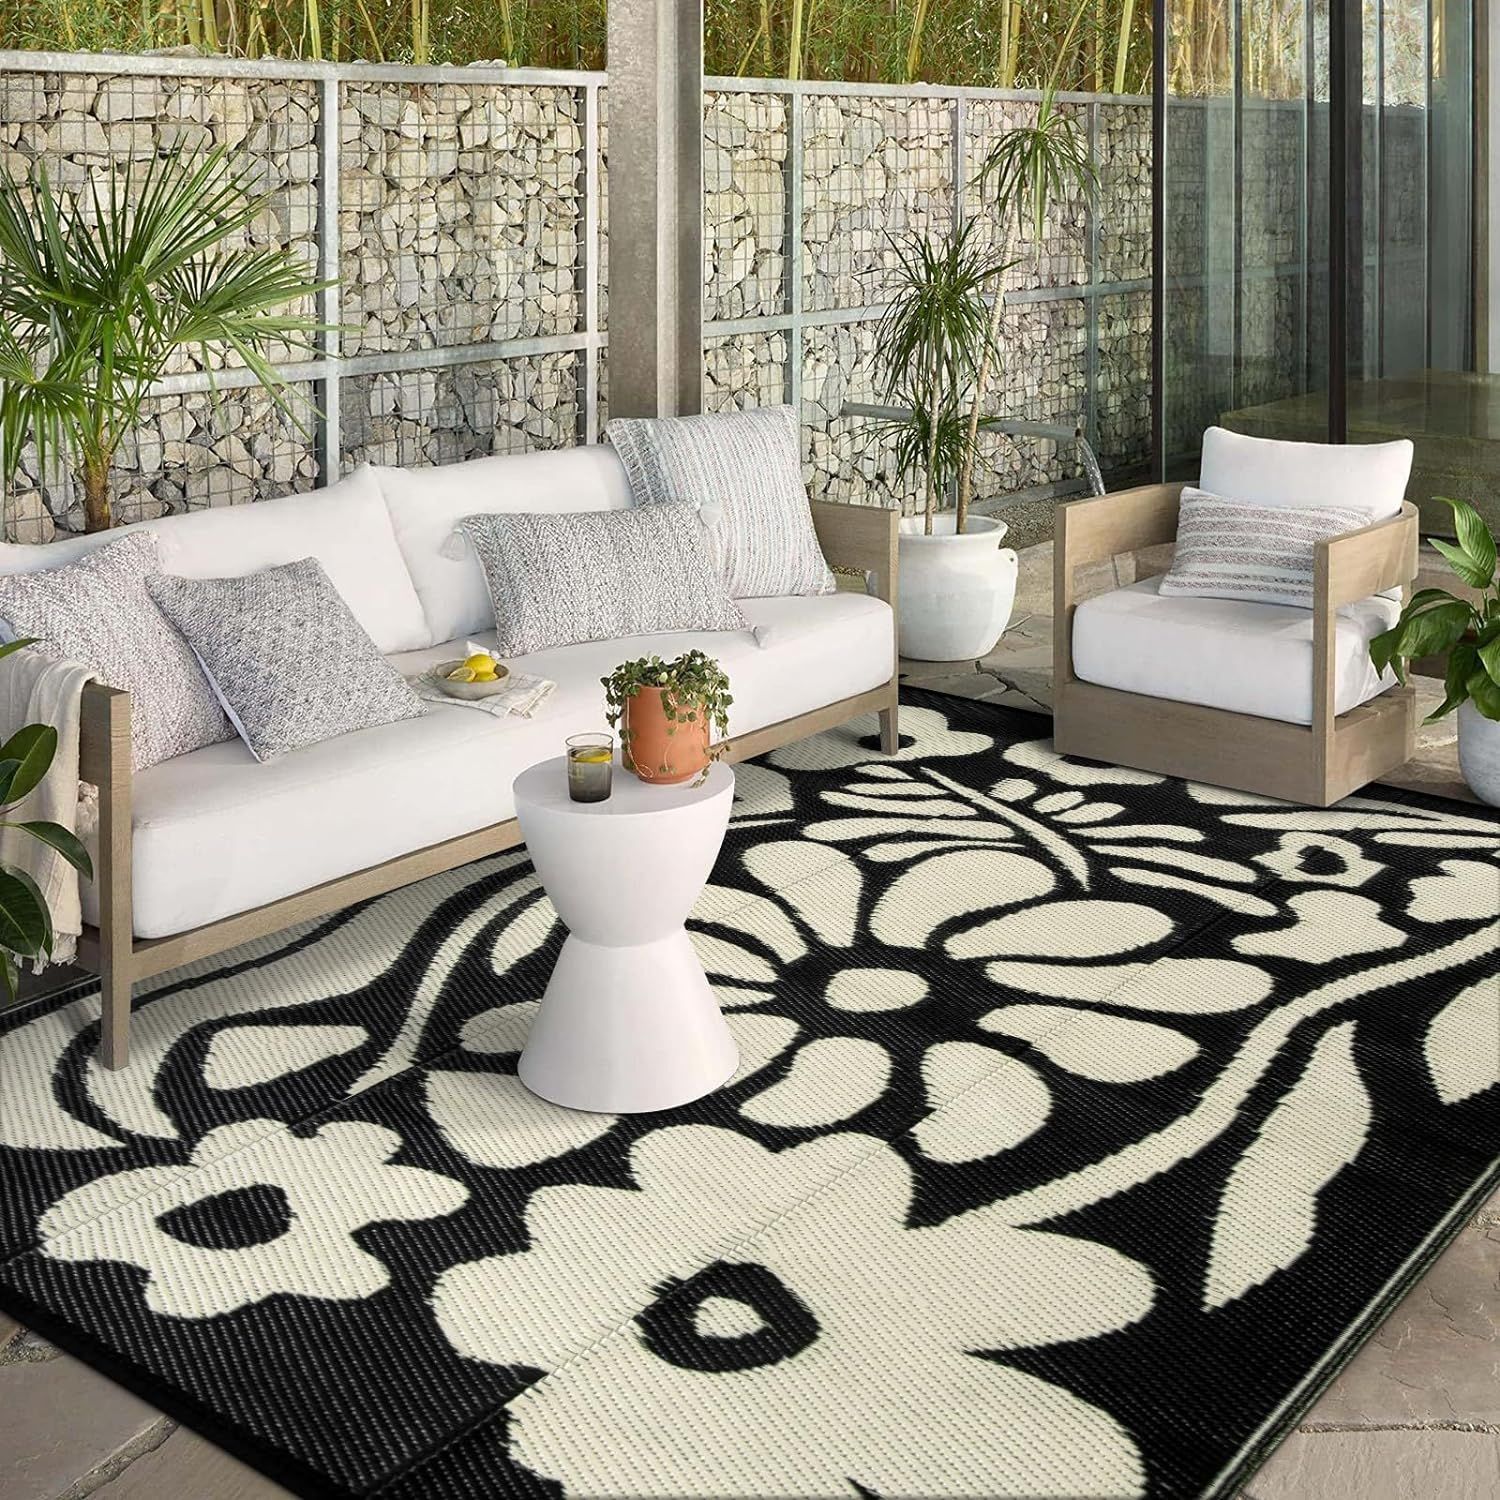 Wonnitar 8x10 Outdoor Patio Rug Clearance,Waterproof Plastic Straw Rugs Reversible Outside Large Mat,Abstract Floral Lightweight Carpet for Backyard Balcony RV Camping Deck,Black and White | Amazon (US)